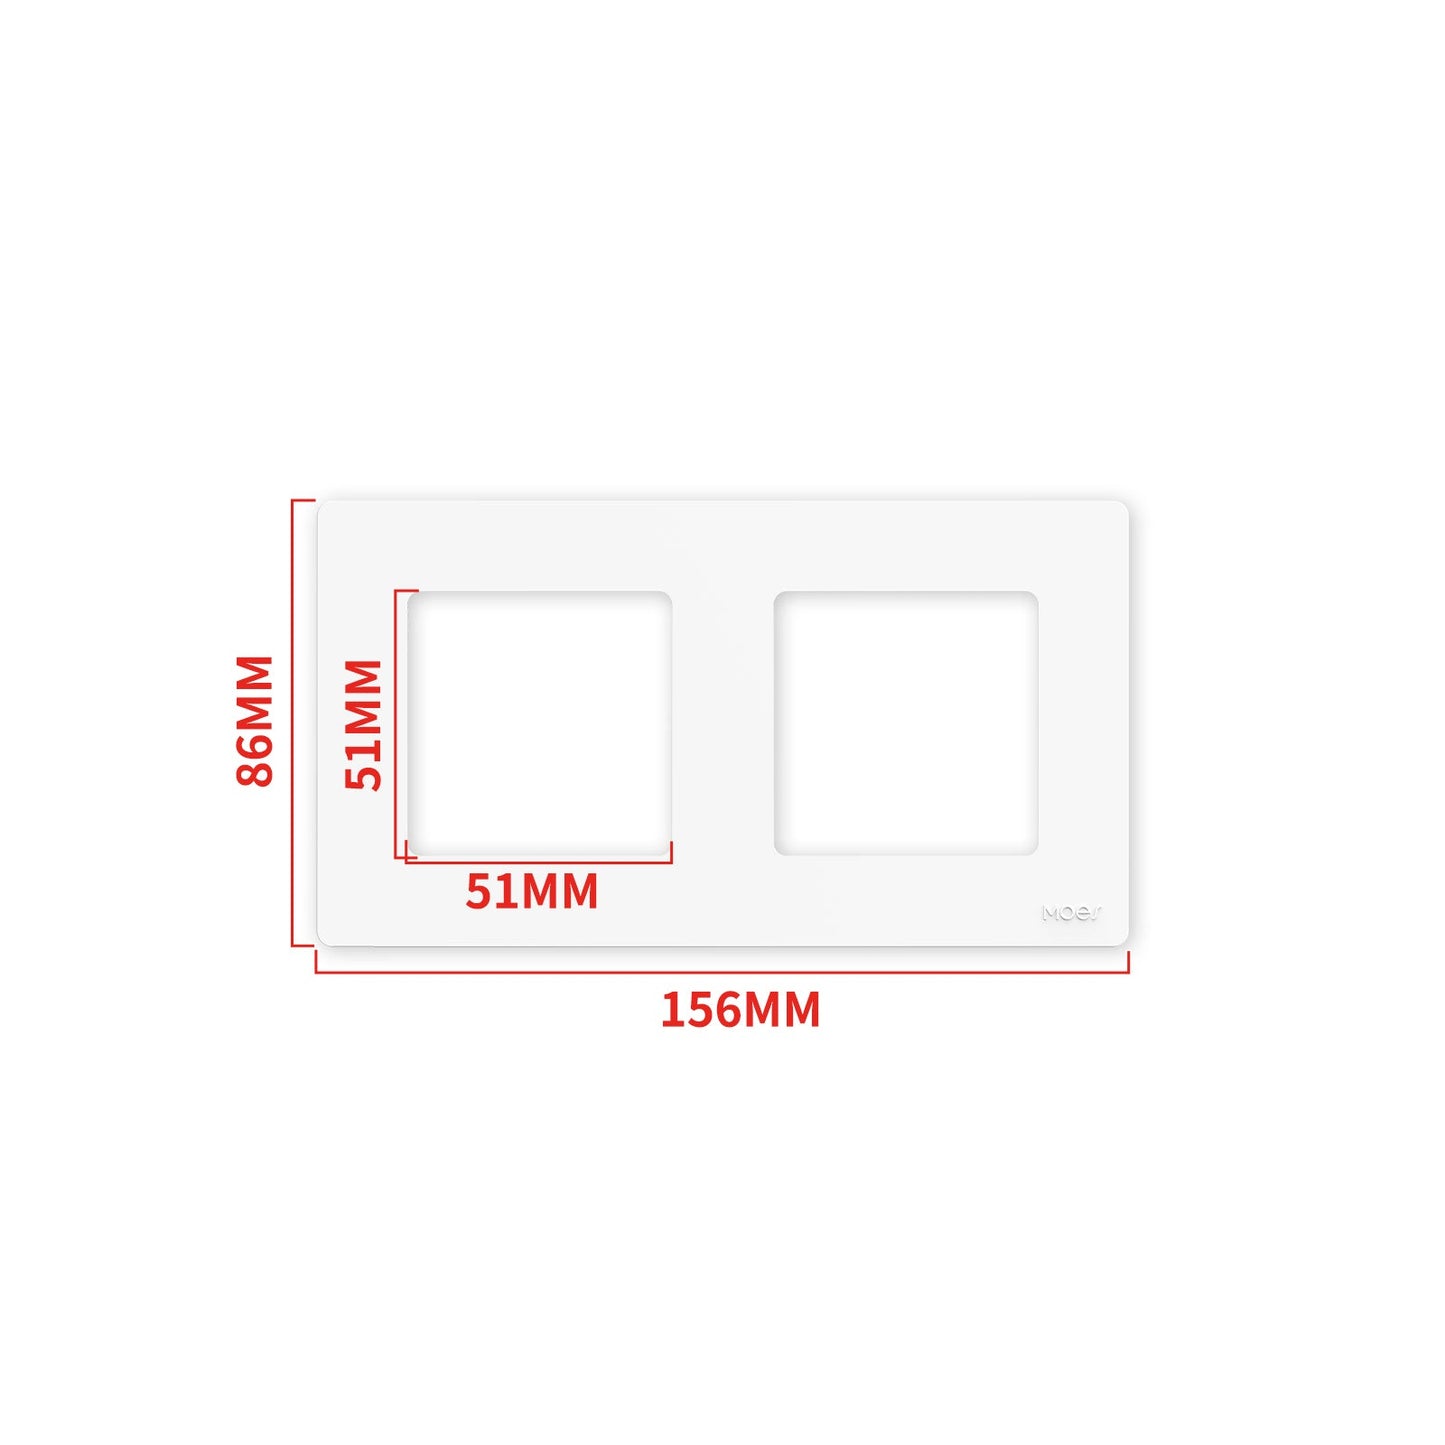 MOES 2nd Star Ring Smart ZigBee3.0 Push Button Light Switch Embedded Touch Switch & 2-4Gang Panel EU - MOES